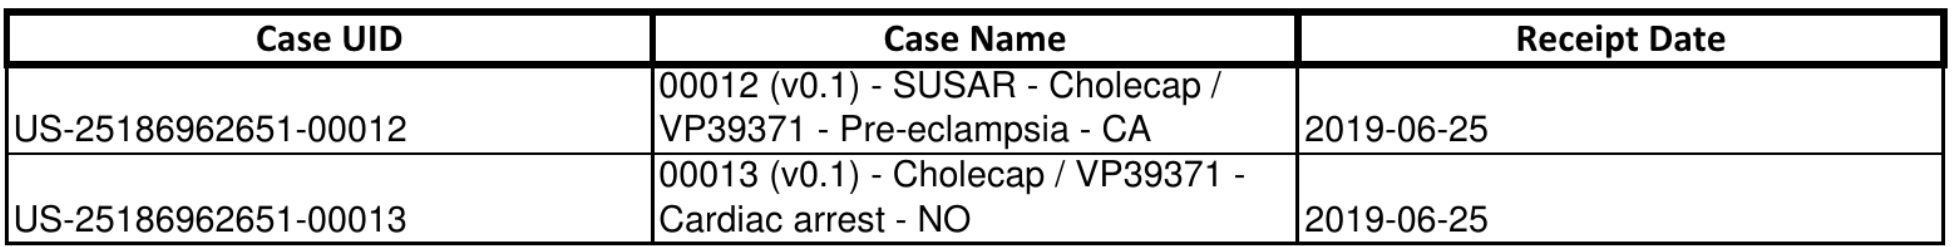 Case Listing Table